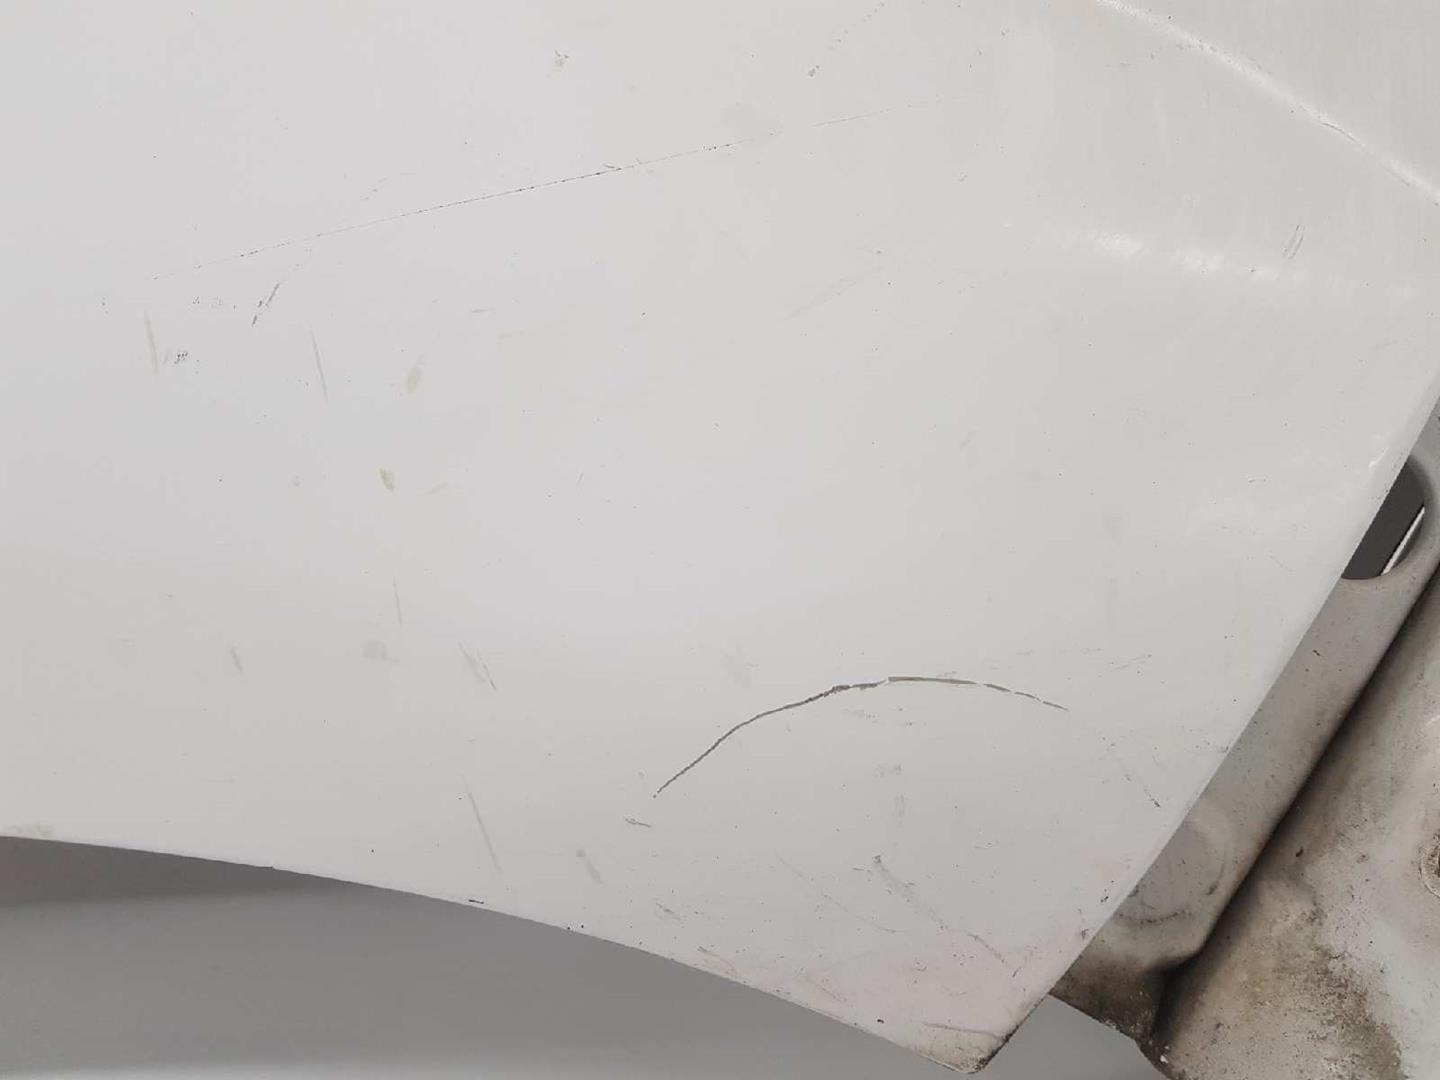 RENAULT Ducato Front Right Fender 7782524467, 7782524467, BLANCO 19709690